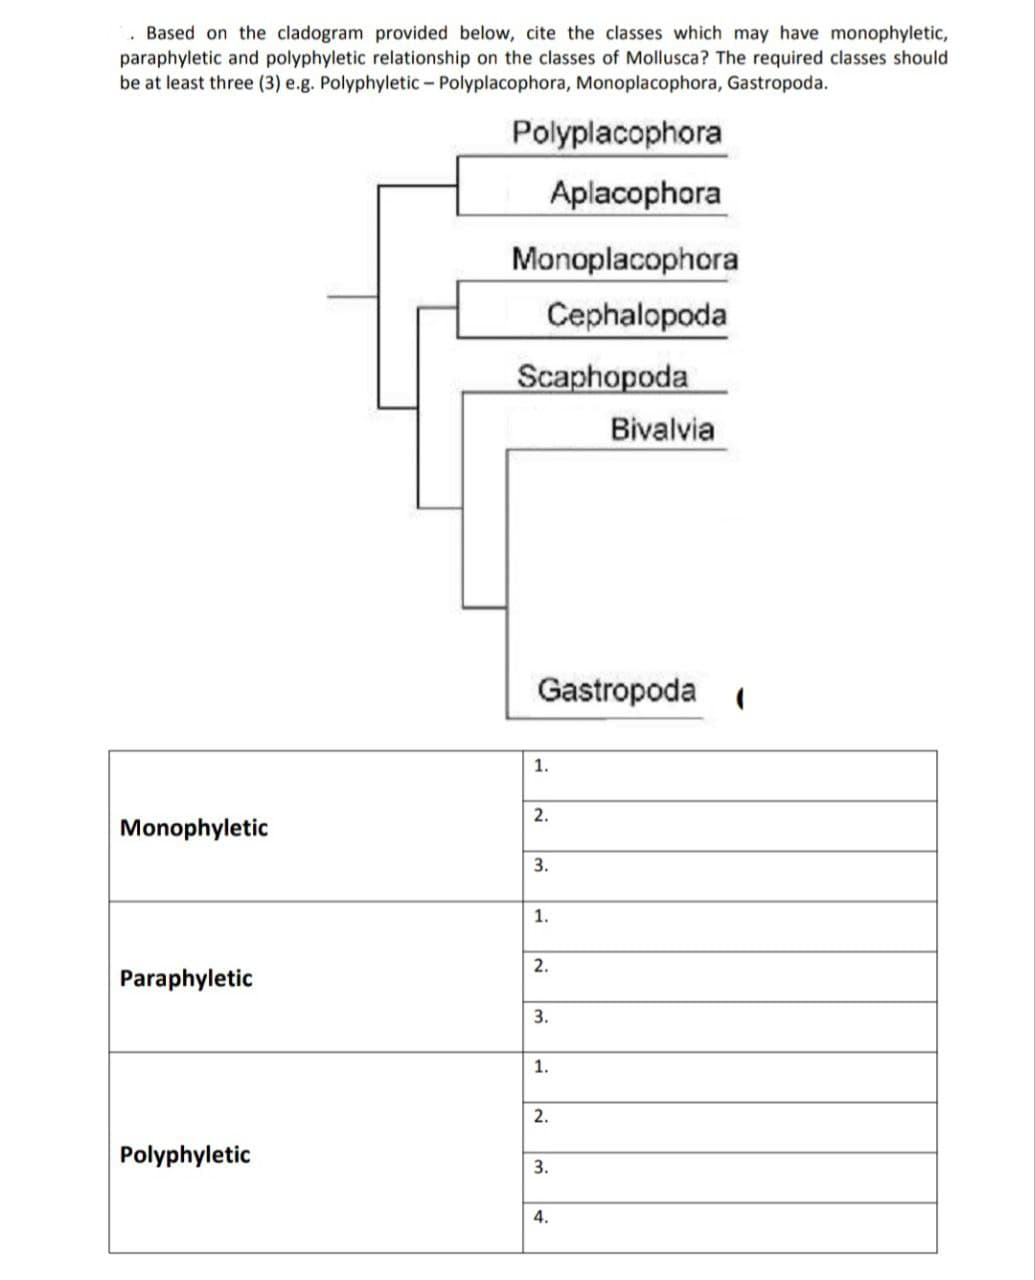 . Based on the cladogram provided below, cite the classes which may have monophyletic,
paraphyletic and polyphyletic relationship on the classes of Mollusca? The required classes should
be at least three (3) e.g. Polyphyletic - Polyplacophora, Monoplacophora, Gastropoda.
Monophyletic
Paraphyletic
Polyphyletic
Polyplacophora
Aplacophora
Monoplacophora
Cephalopoda
Scaphopoda
Gastropoda (
1.
2.
3.
1.
2.
3.
1.
2.
3.
Bivalvia
4.